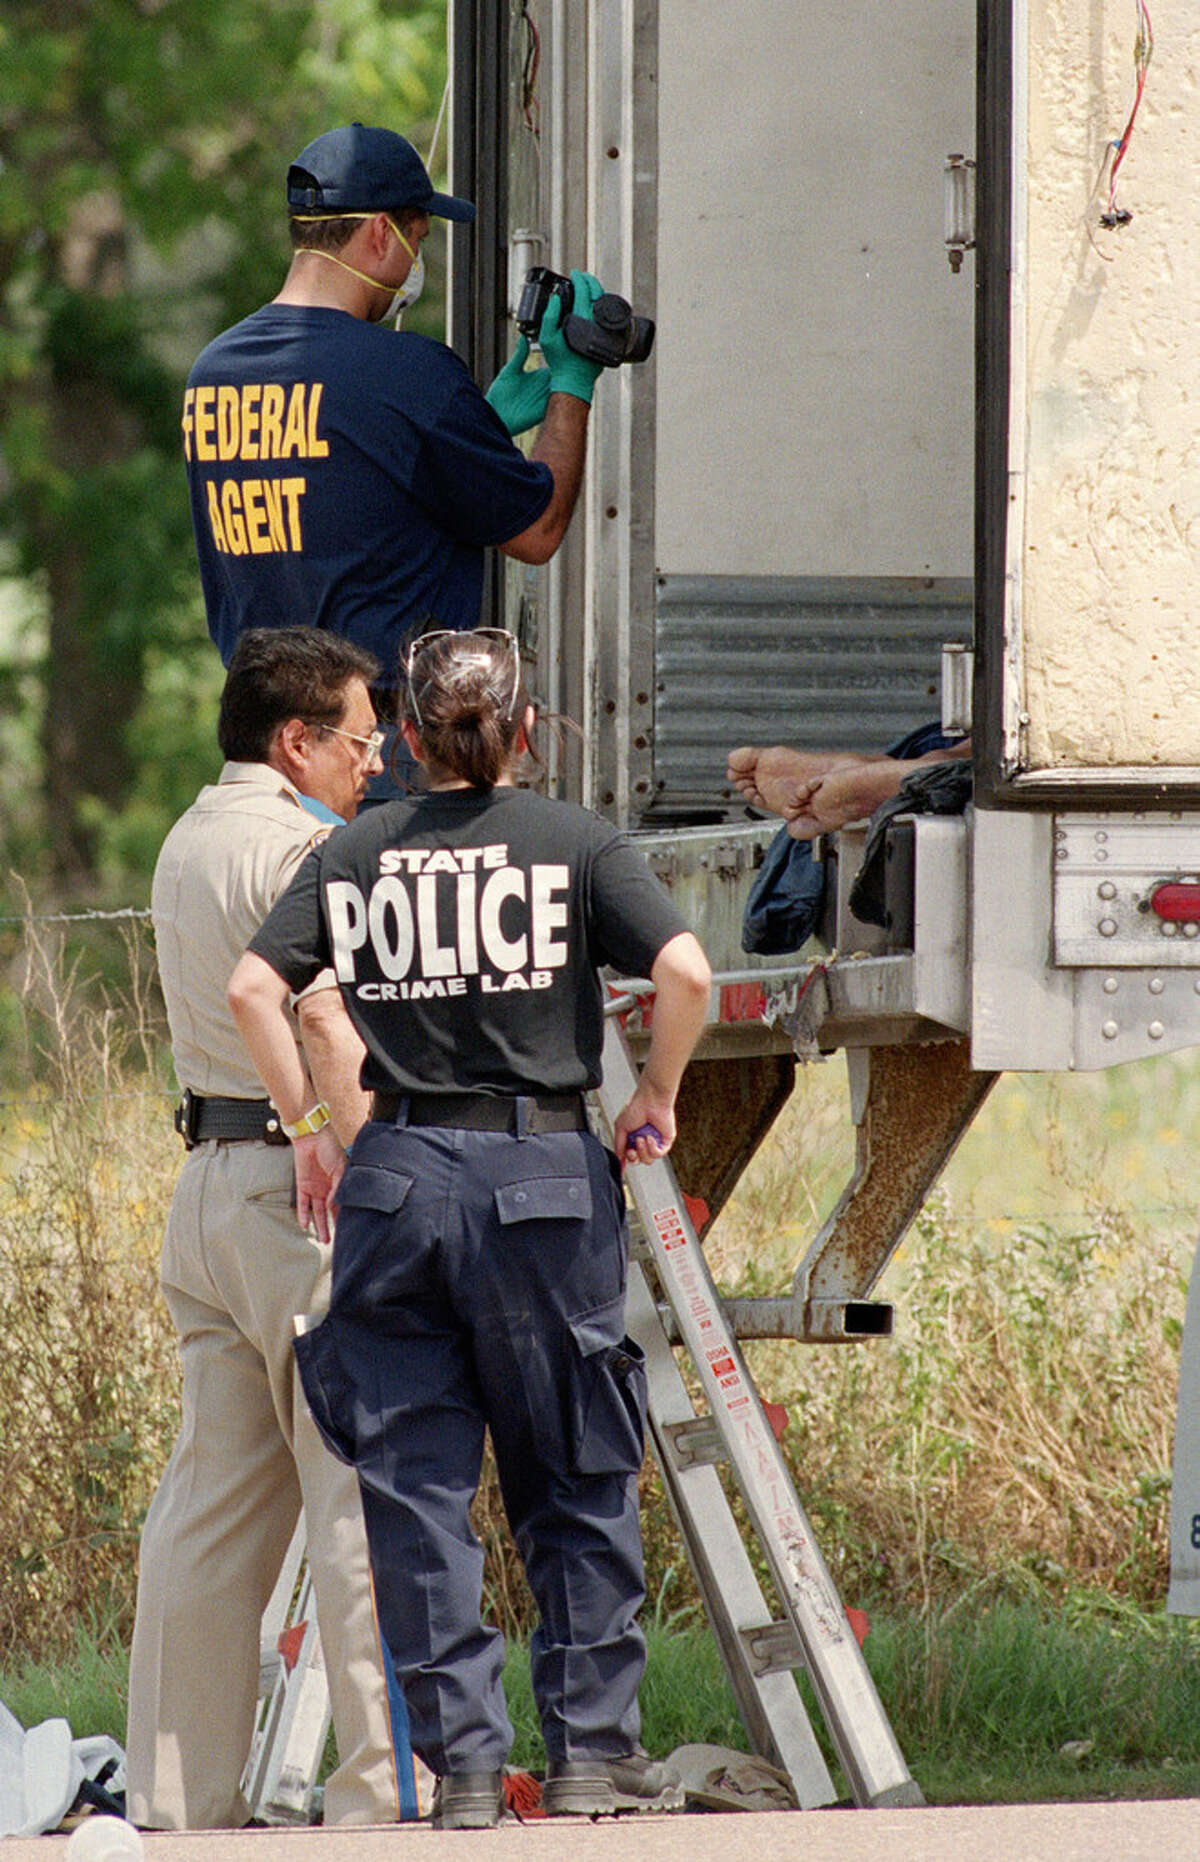 5/14/2003--Investigators photograph the scene inside and around a truck trailer where 16 people were found dead early Wednesday at a truck stop near Victoria, TX. Sheriff's deputies found the bodies about 2 a.m. when they answered a reported disturbance inside a trailer at the Speedy Stop truck stop, six miles south of Victoria, TX on US 77 at Fleming Prarie Rd. Photo by Steve Ueckert / Chronicle